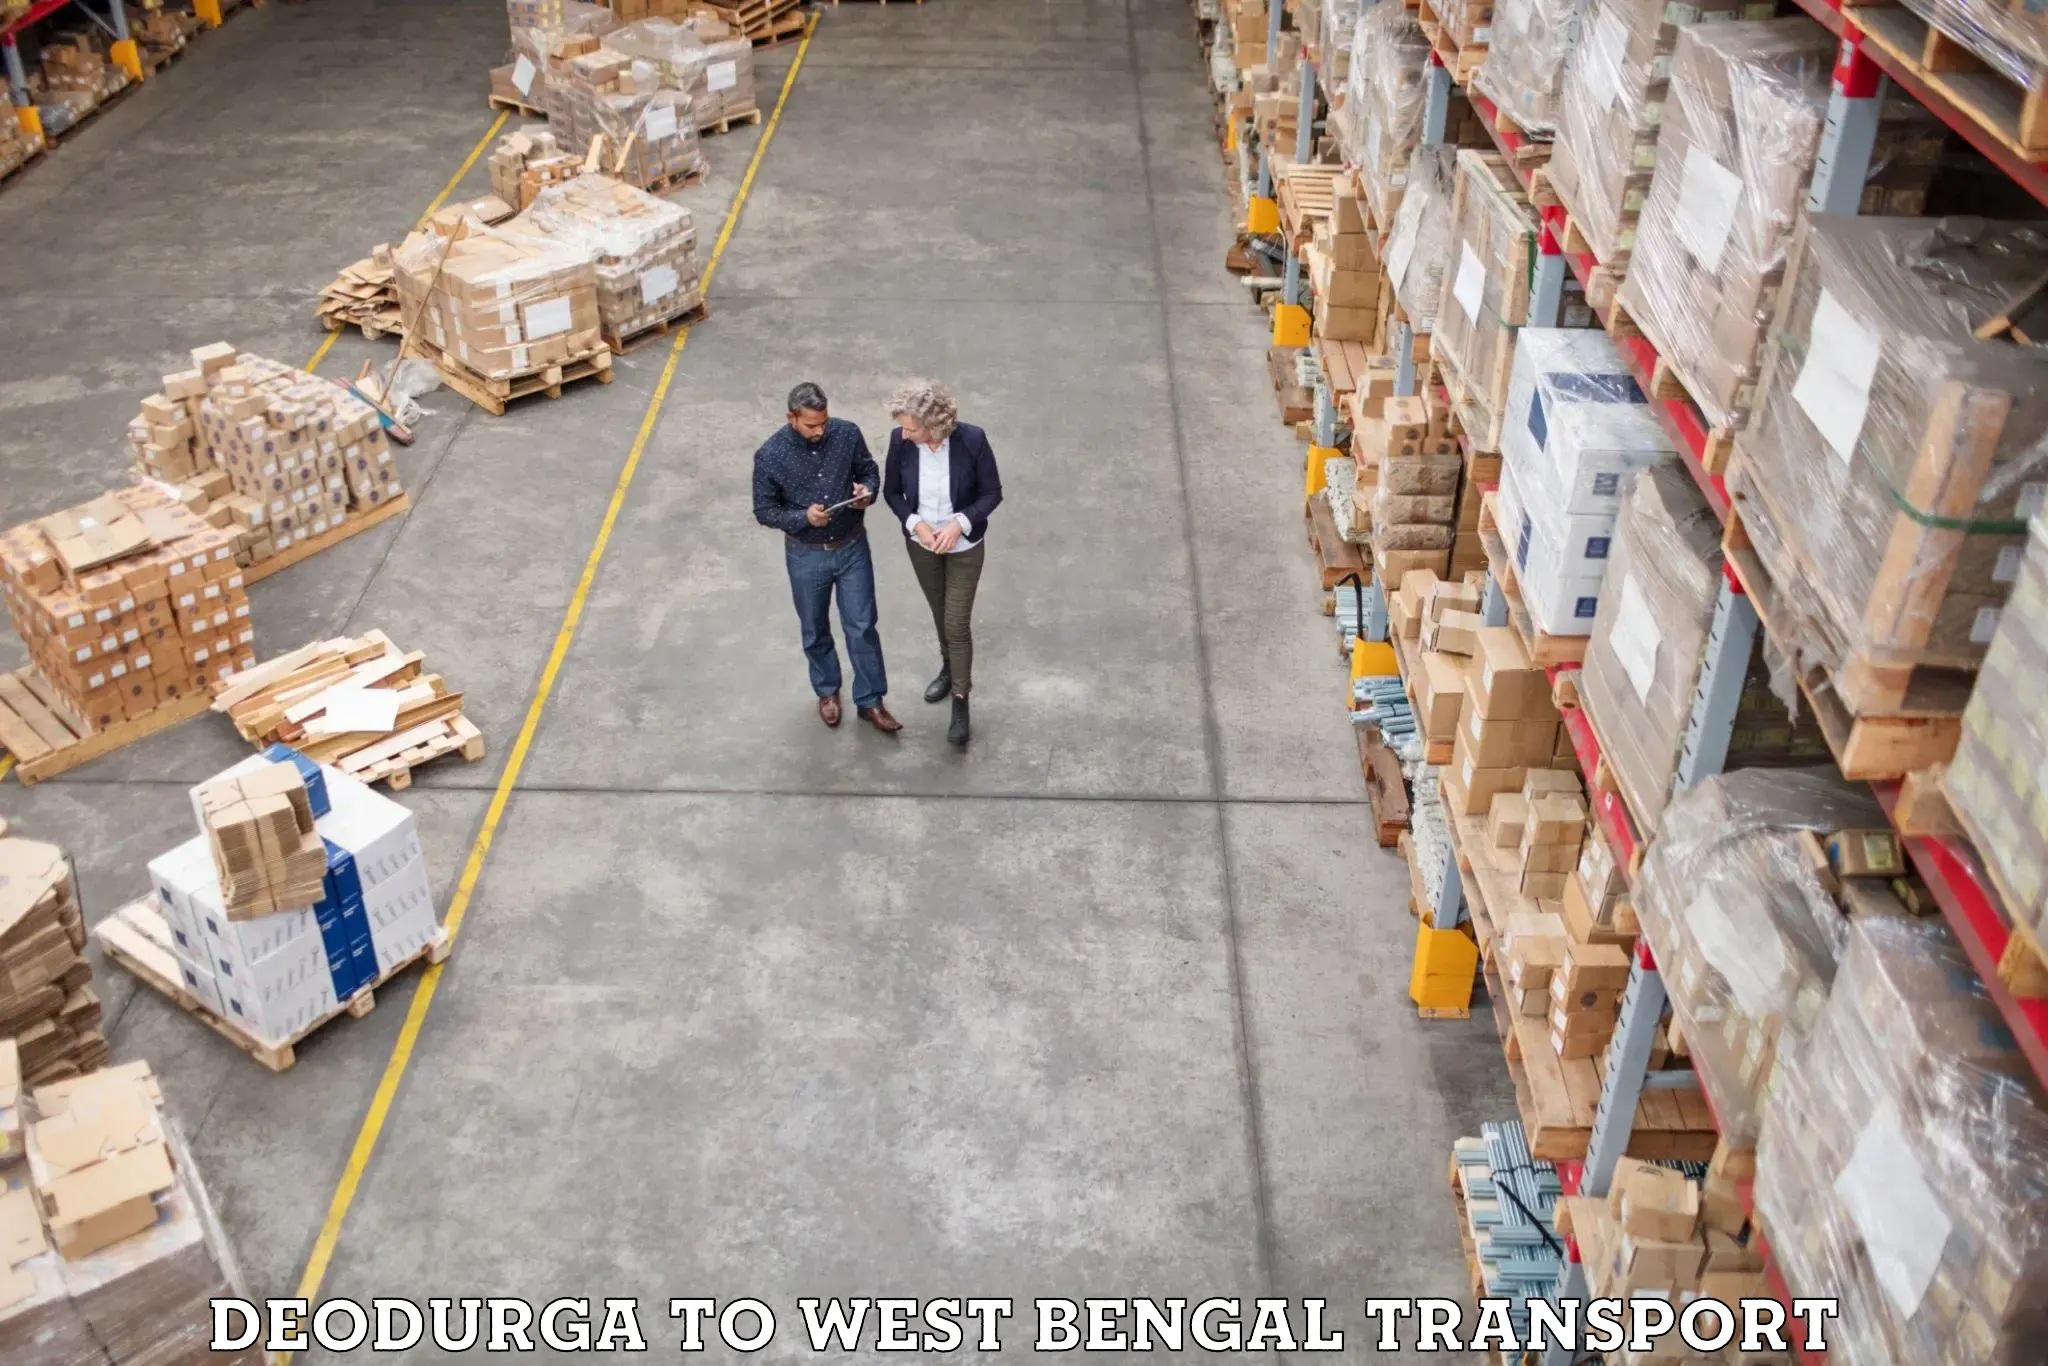 Part load transport service in India Deodurga to West Bengal